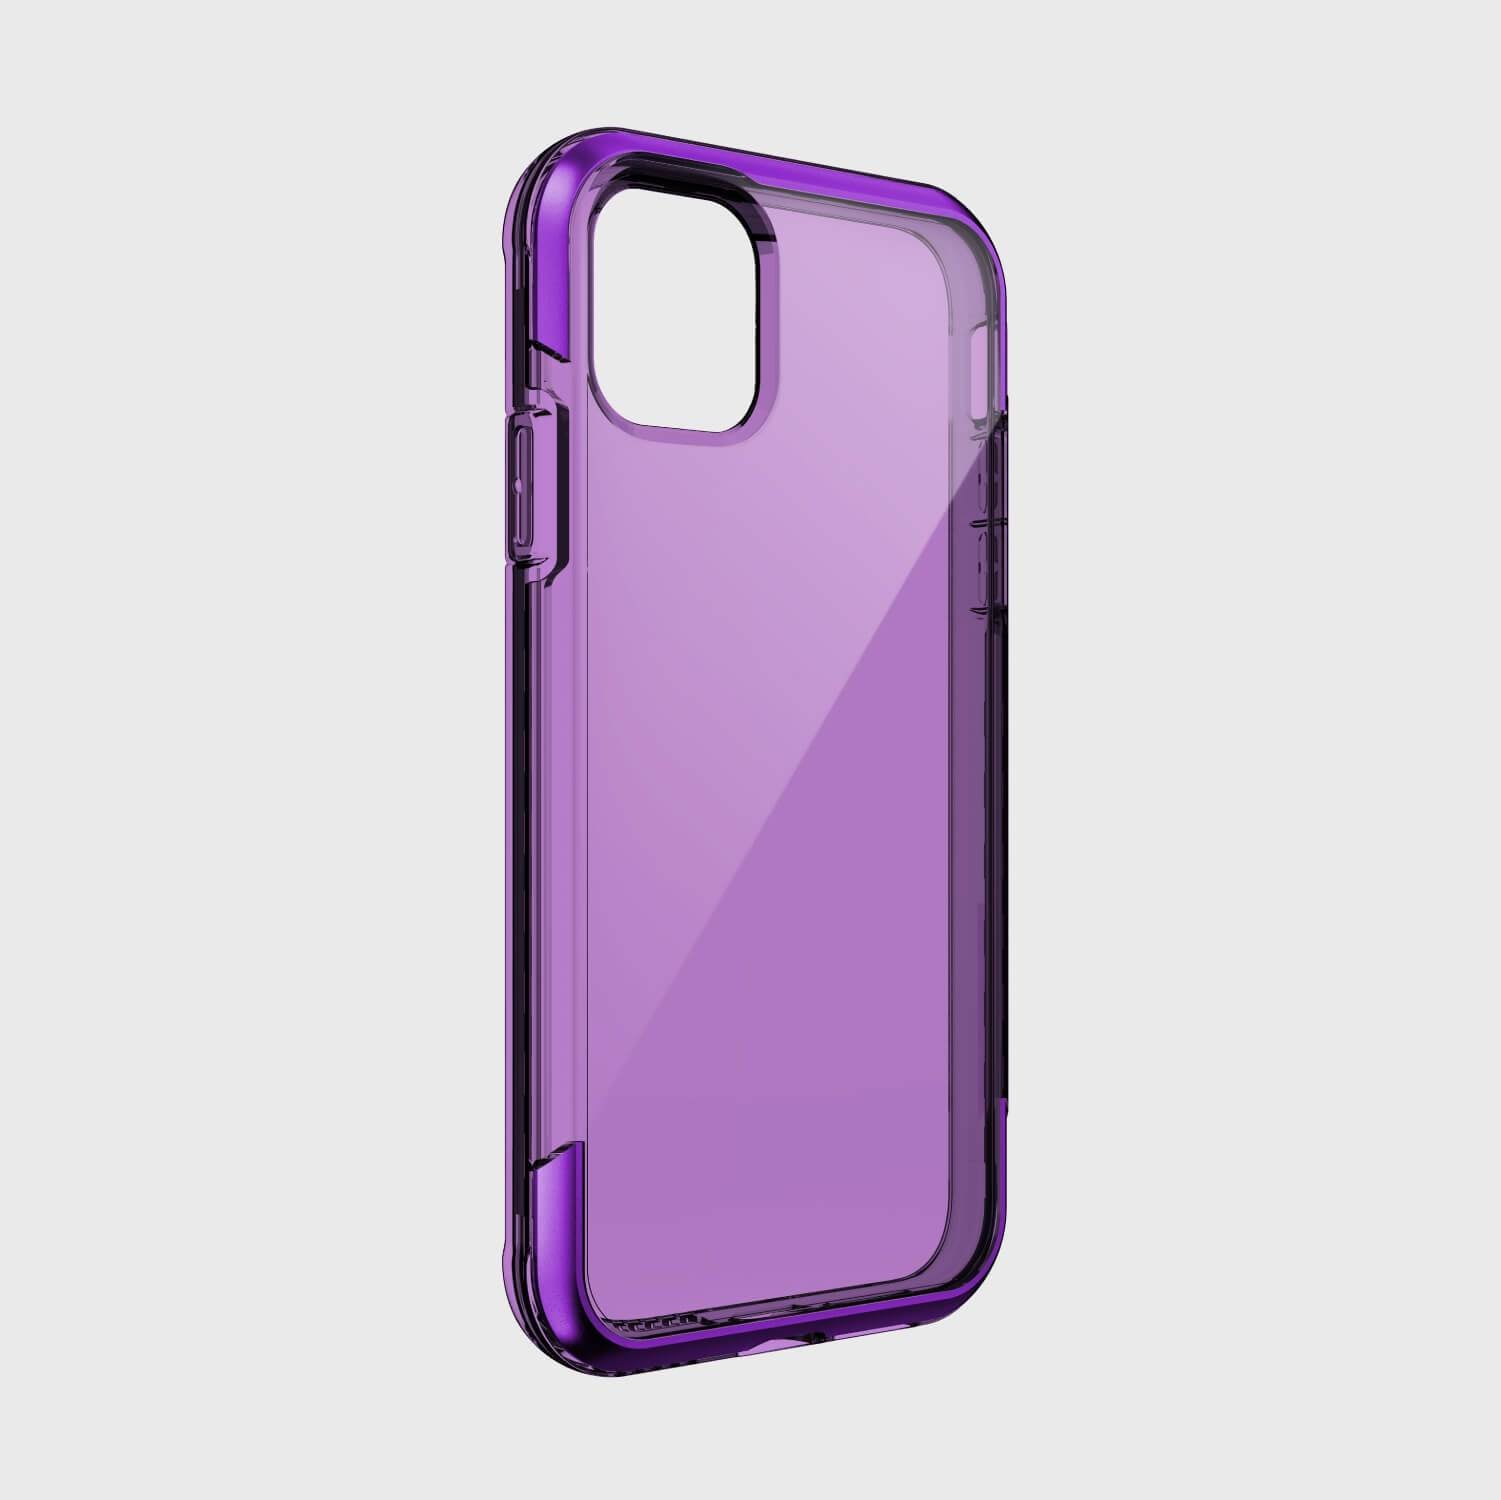 A purple Raptic iPhone 11 Pro Case - AIR with drop protection on a white background.